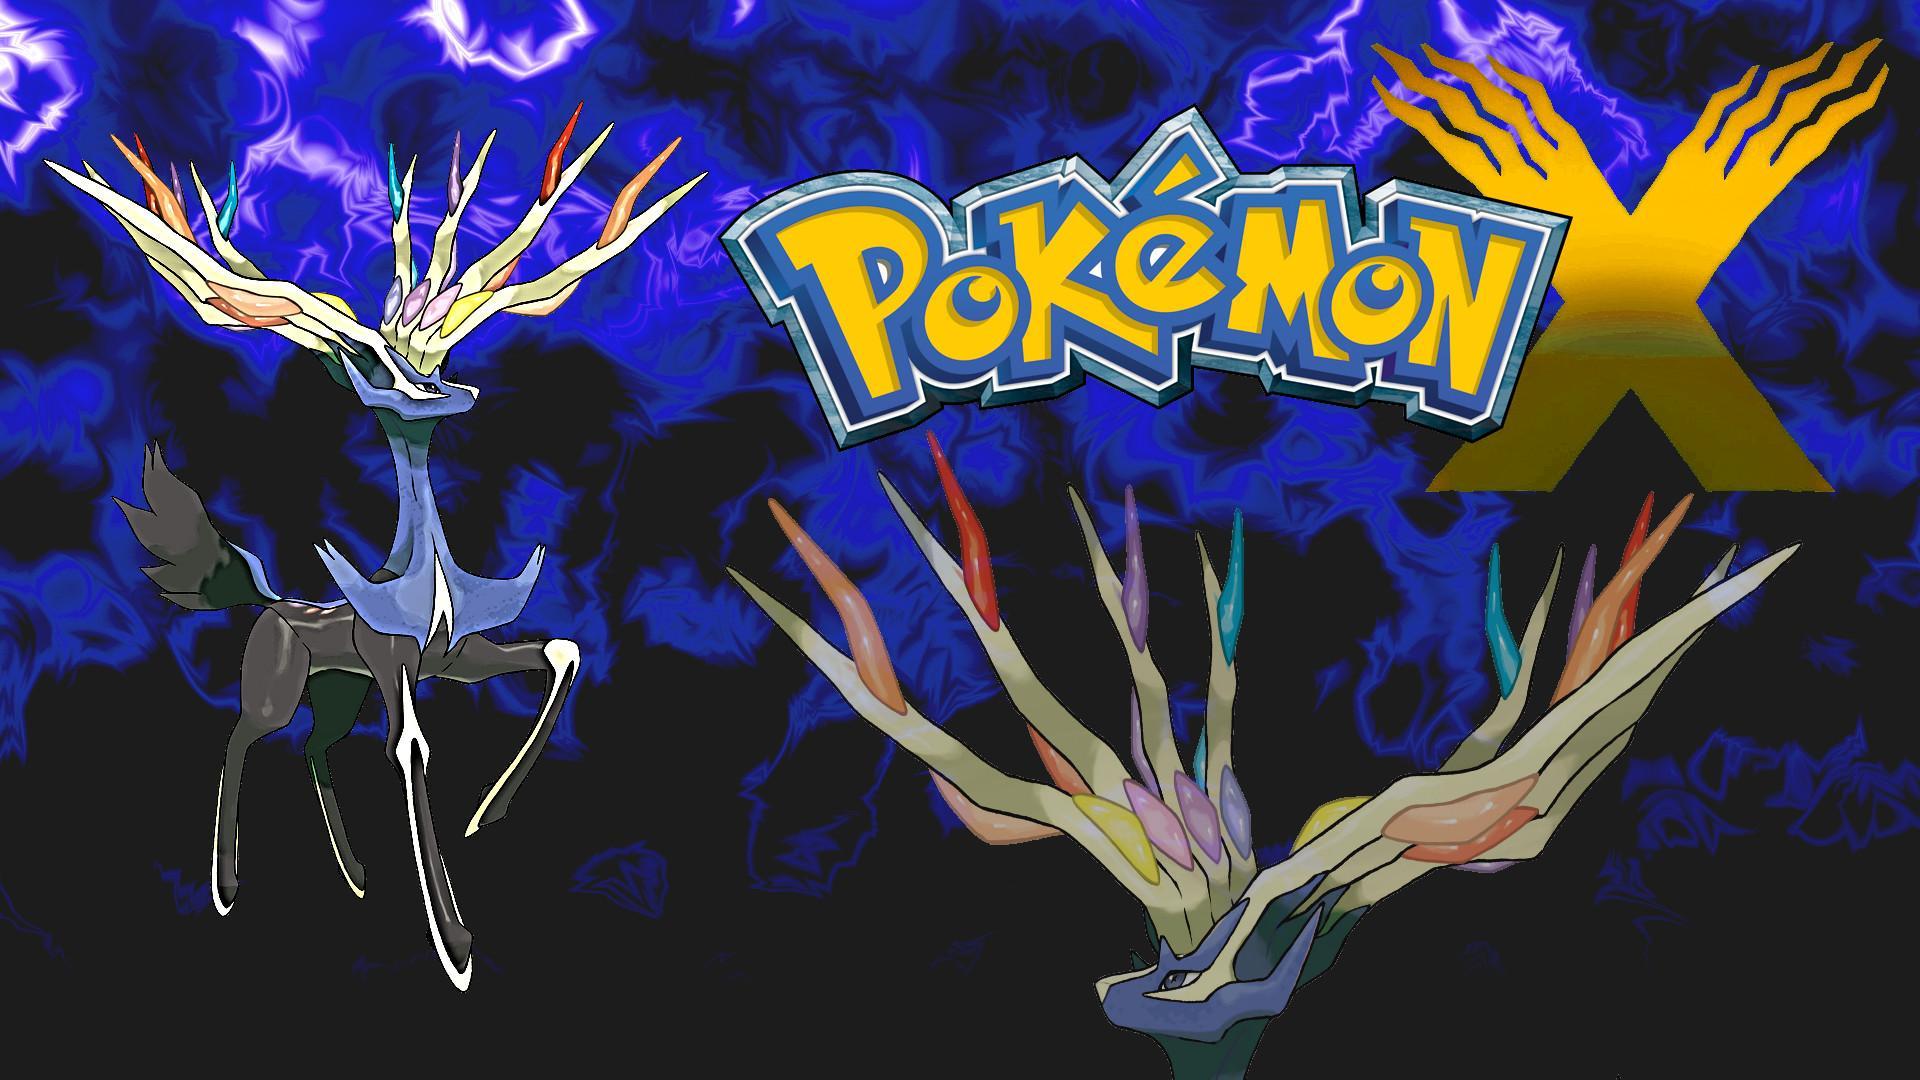 Xerneas Wallpaper, image collections of wallpaper